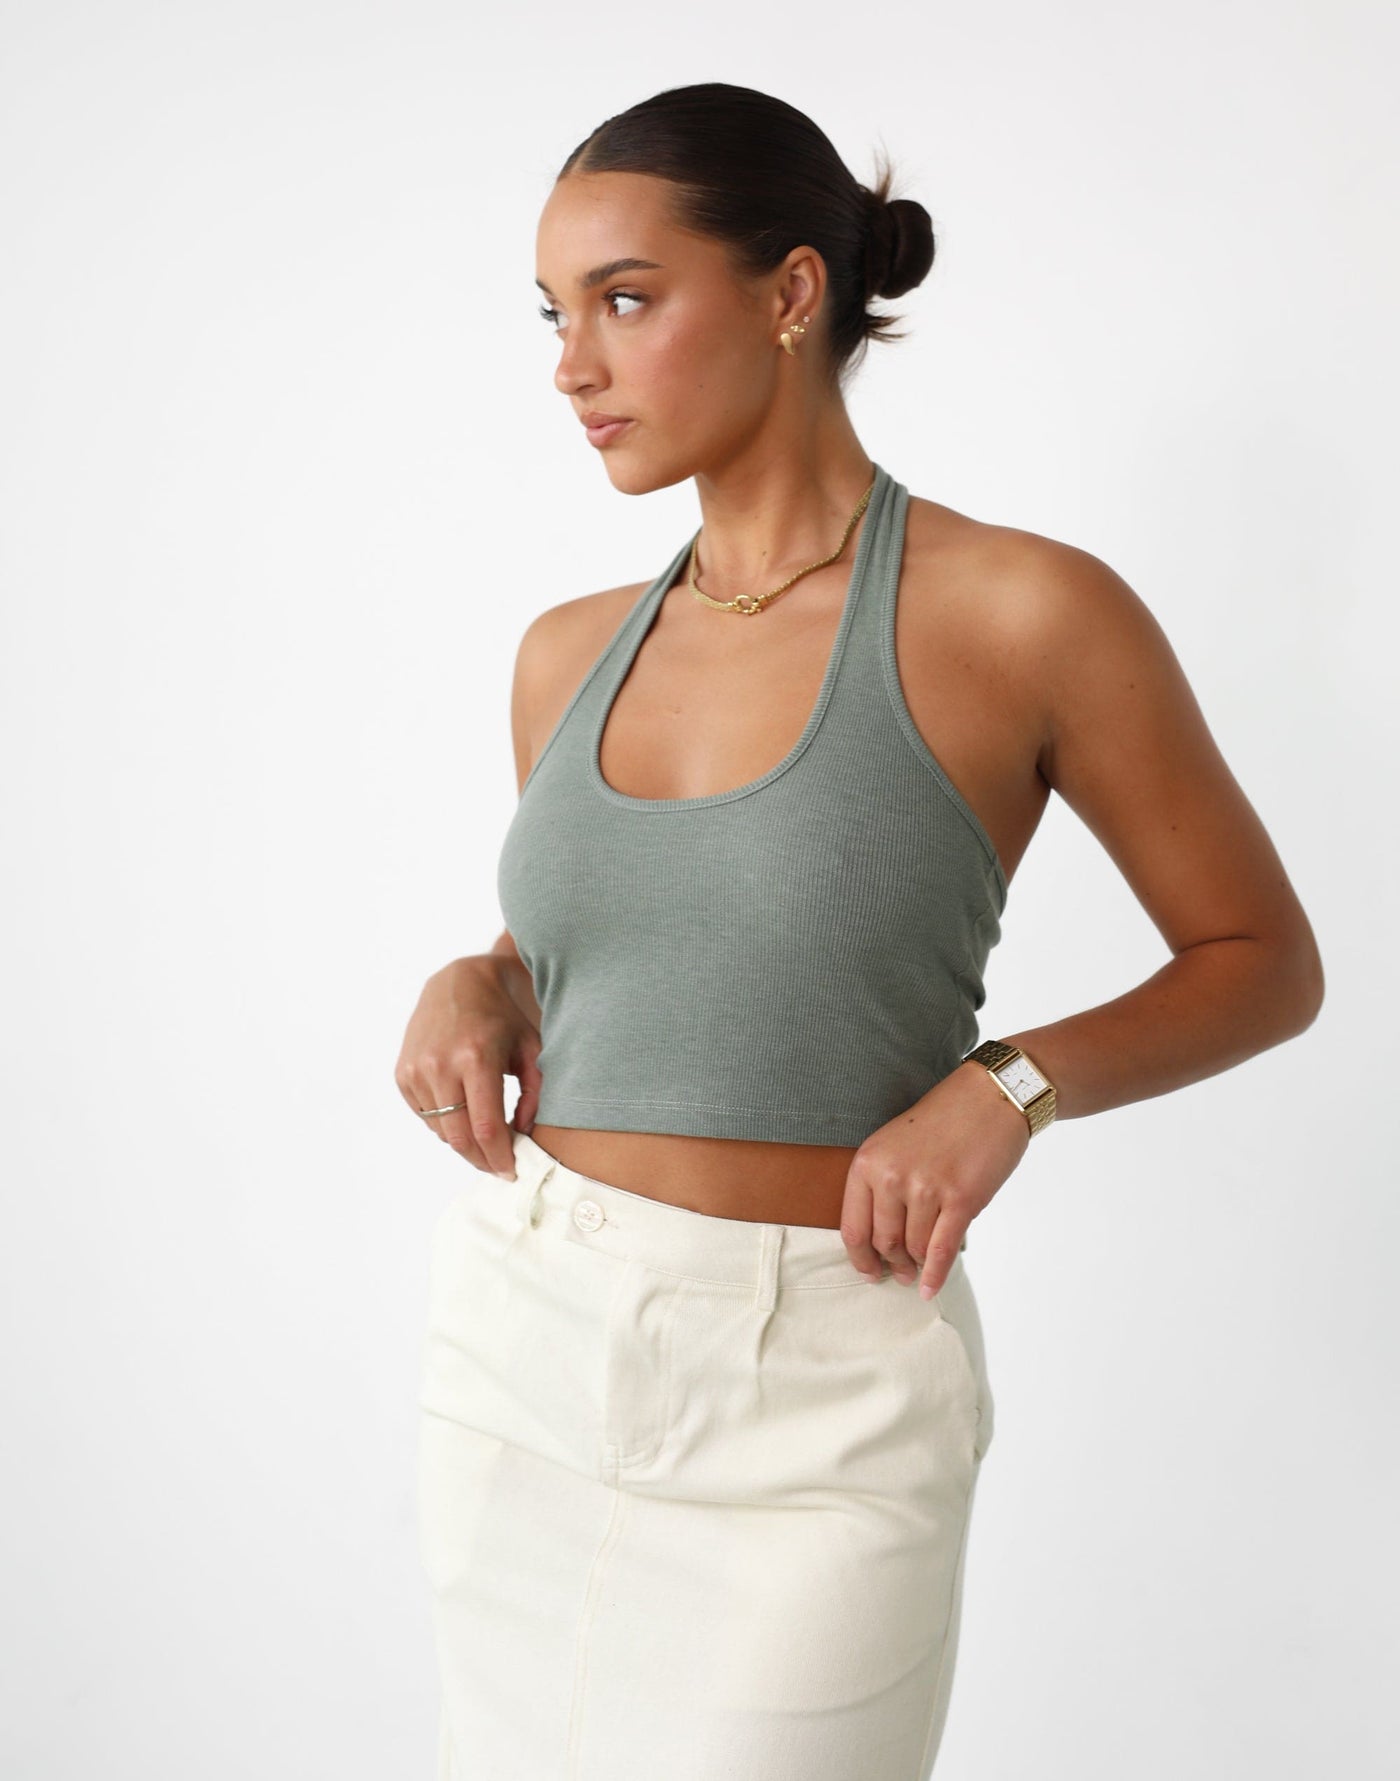 Eve Top (Olive) - Ribbed Halter Neck Crop Top - Women's Top - Charcoal Clothing